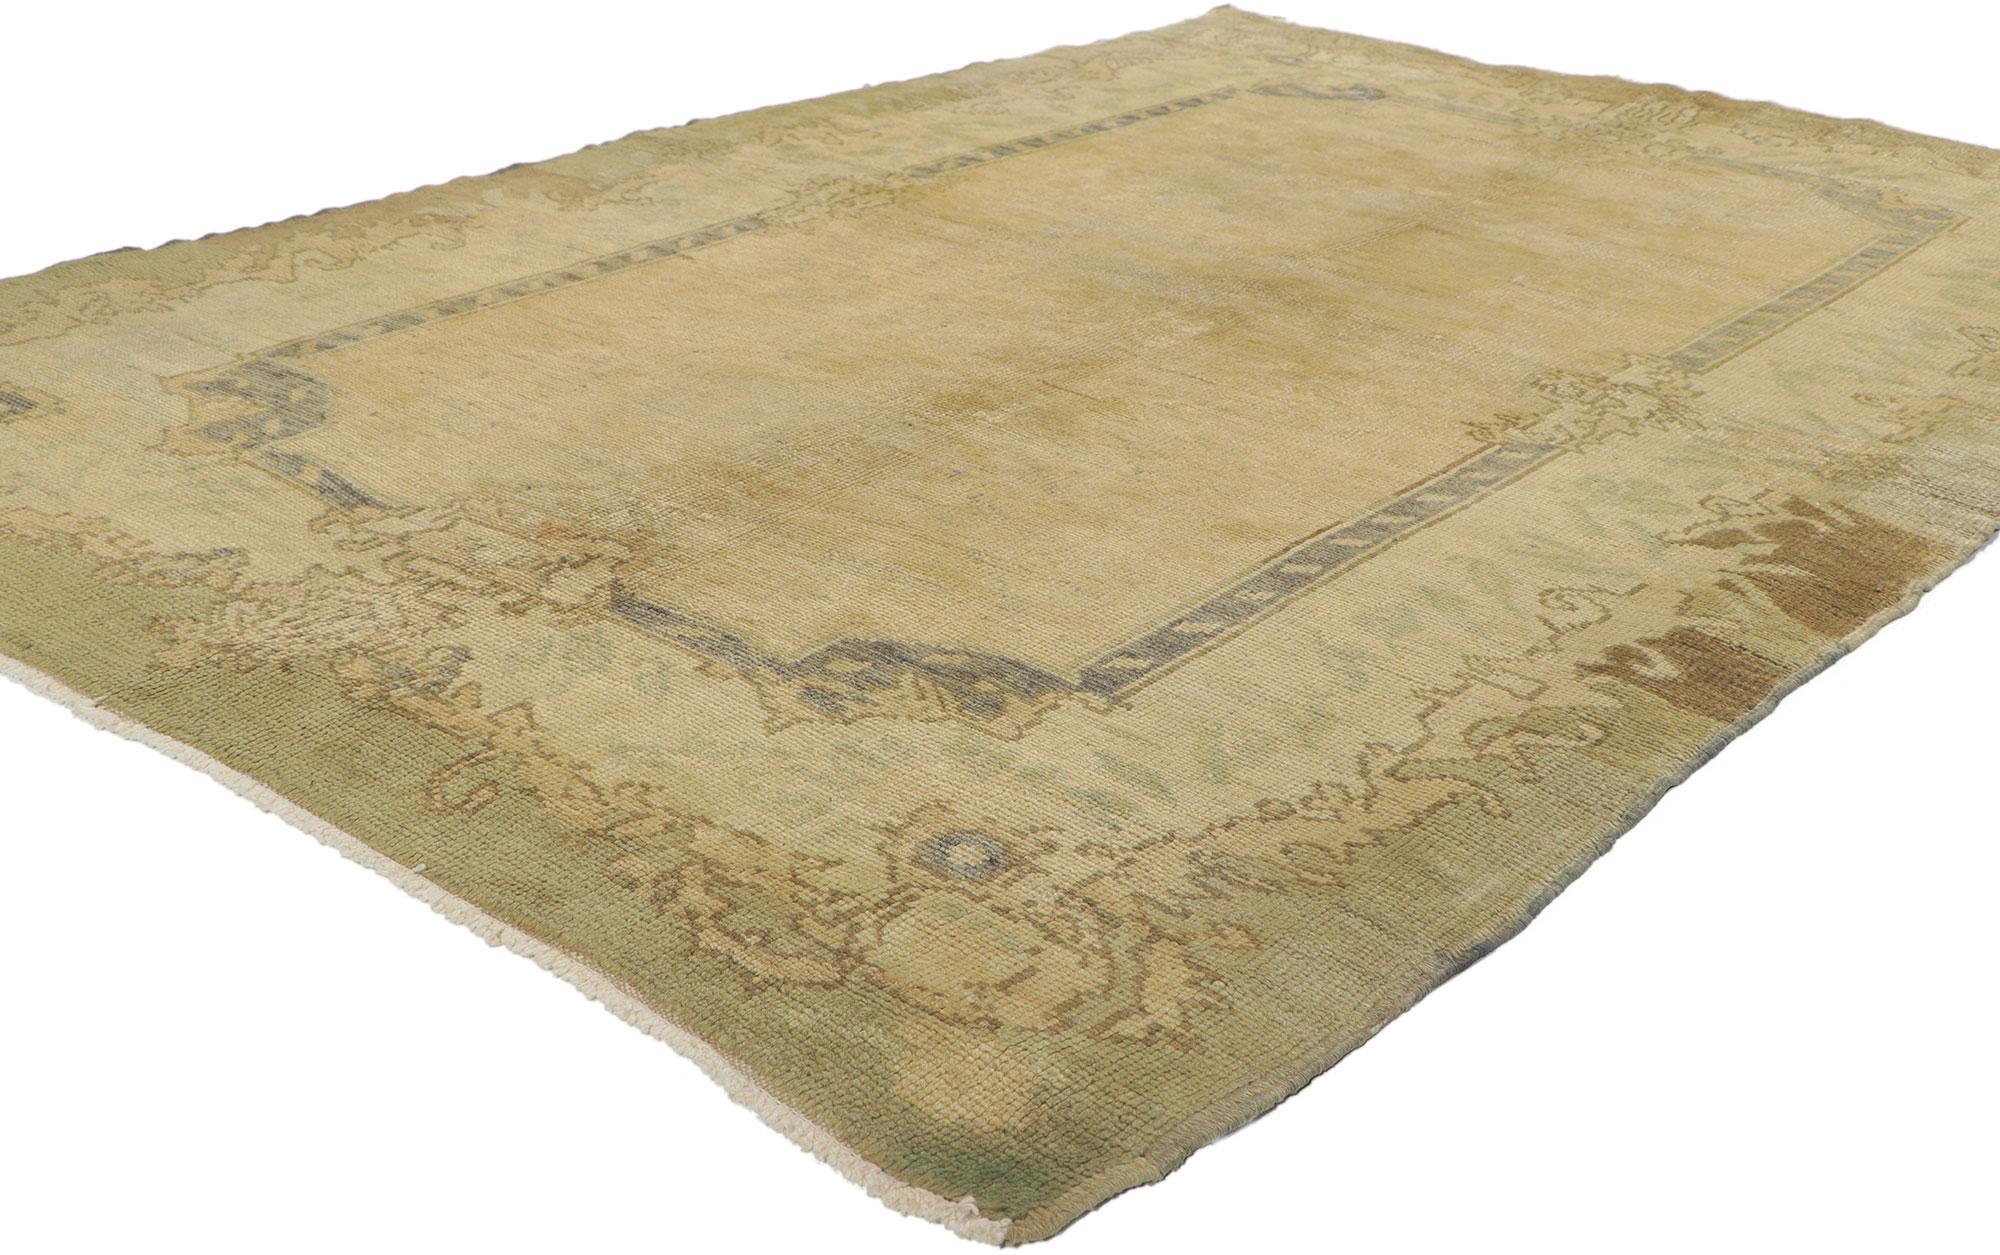 73786 Vintage Turkish Oushak Rug, 04'07 X 06'11. 
Delicately disarming and subtly displaying floral beauty, this hand knotted wool vintage Turkish Oushak rug beautifully embodies a French Chalet style with a hint of Gustavian grace. The abrashed